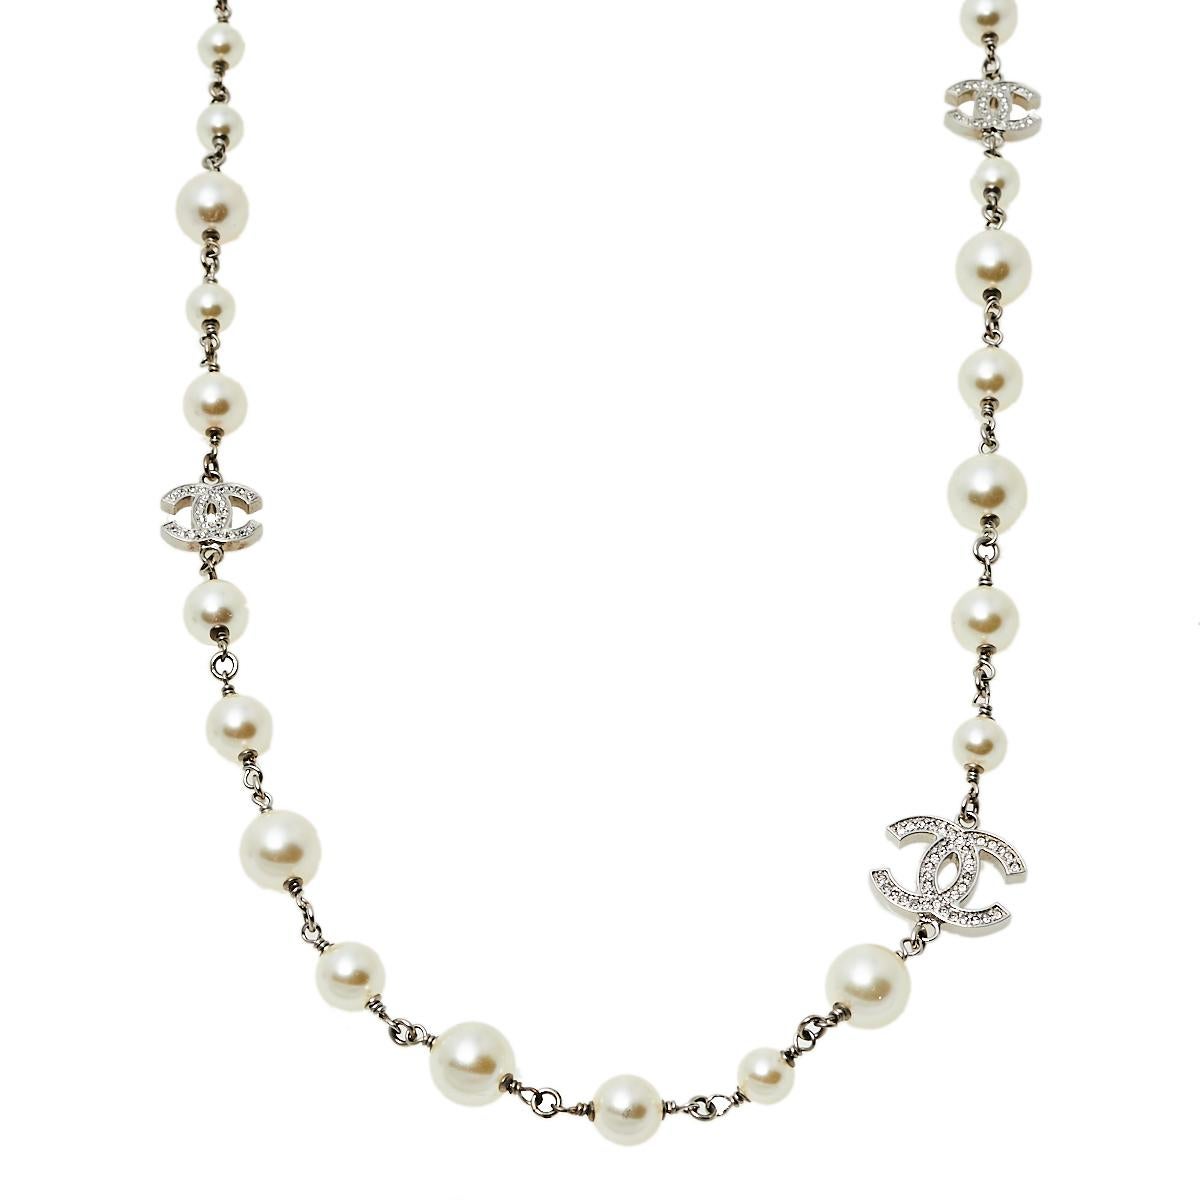 Assembled with faux pearls, crystal-embellished CC logos, this necklace from Chanel has an elegant retro vibe. It is feminine and so well-made that it will surely shine when you wear it with off-shoulder or strapless dresses.

Includes: Invoice,